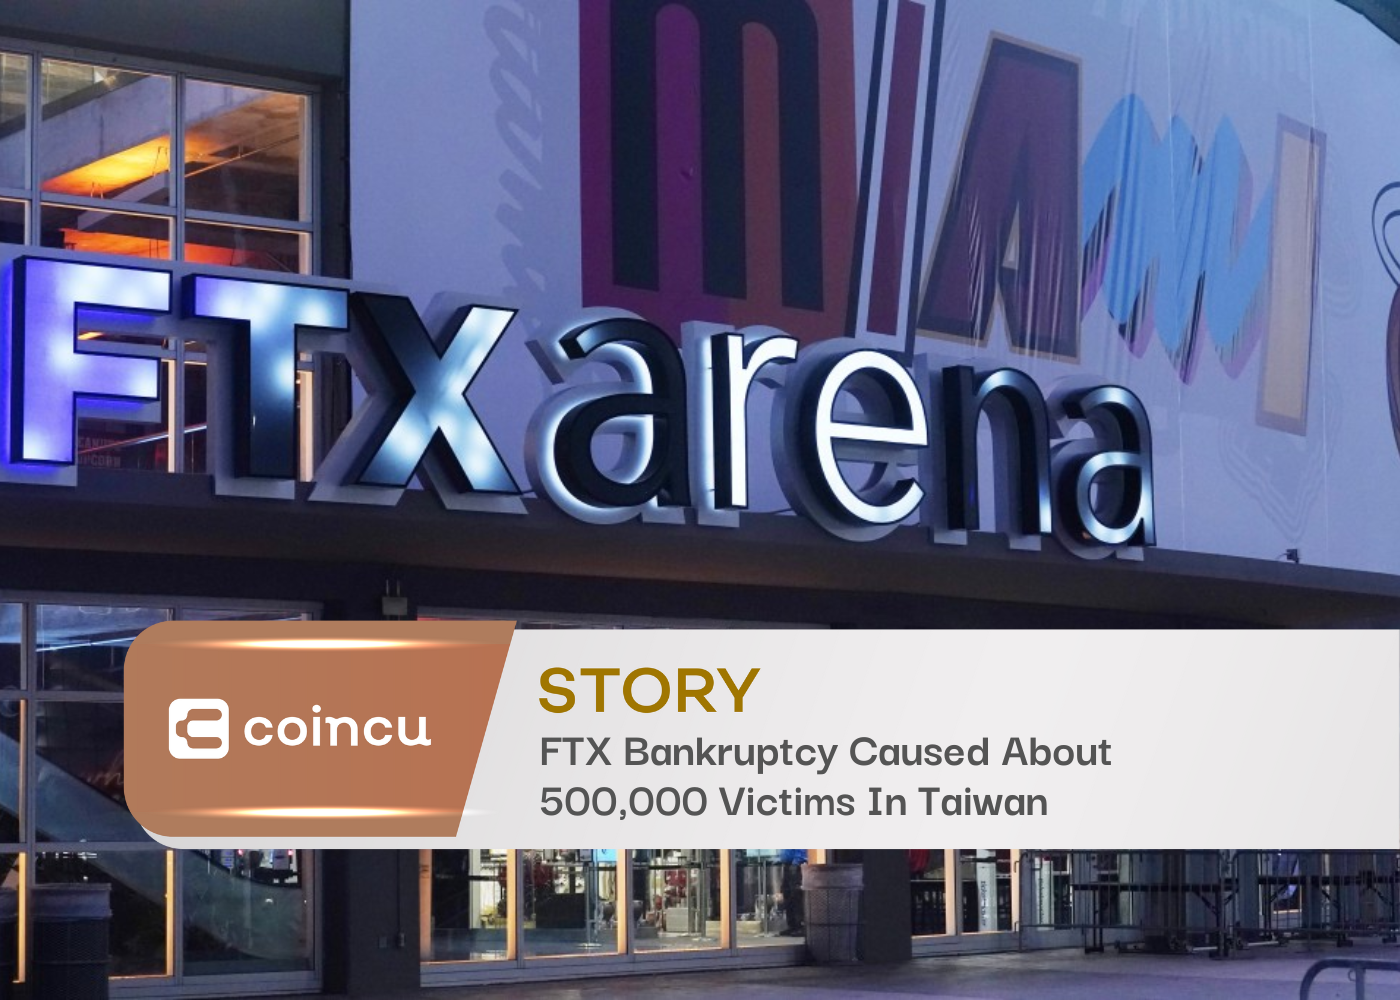 FTX Bankruptcy Caused About 500,000 Victims In Taiwan